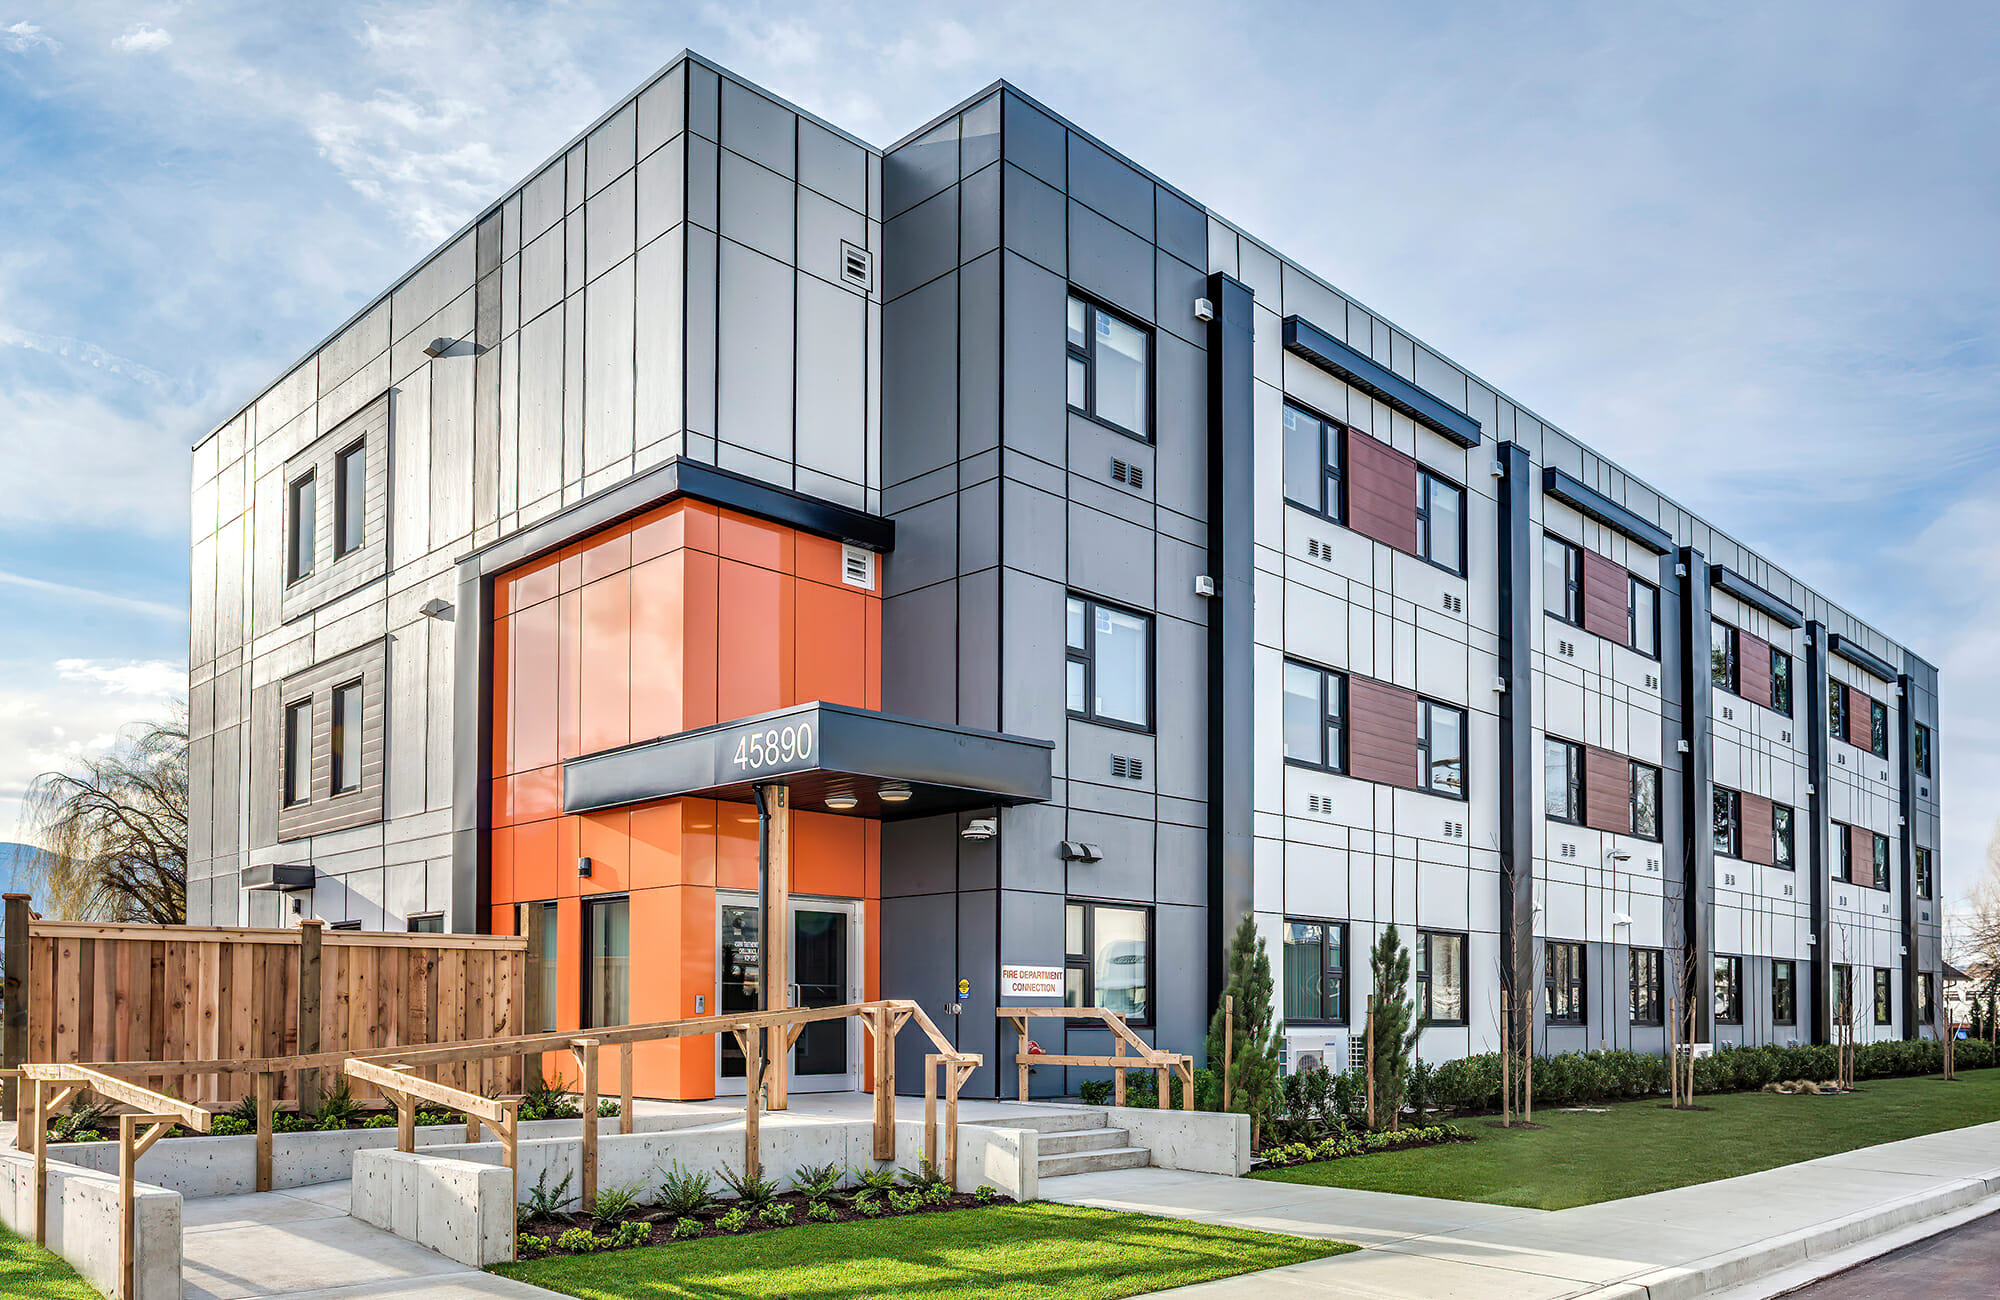 Trethewey Avenue Supportive Housing Complex built by modular building companies in Canada